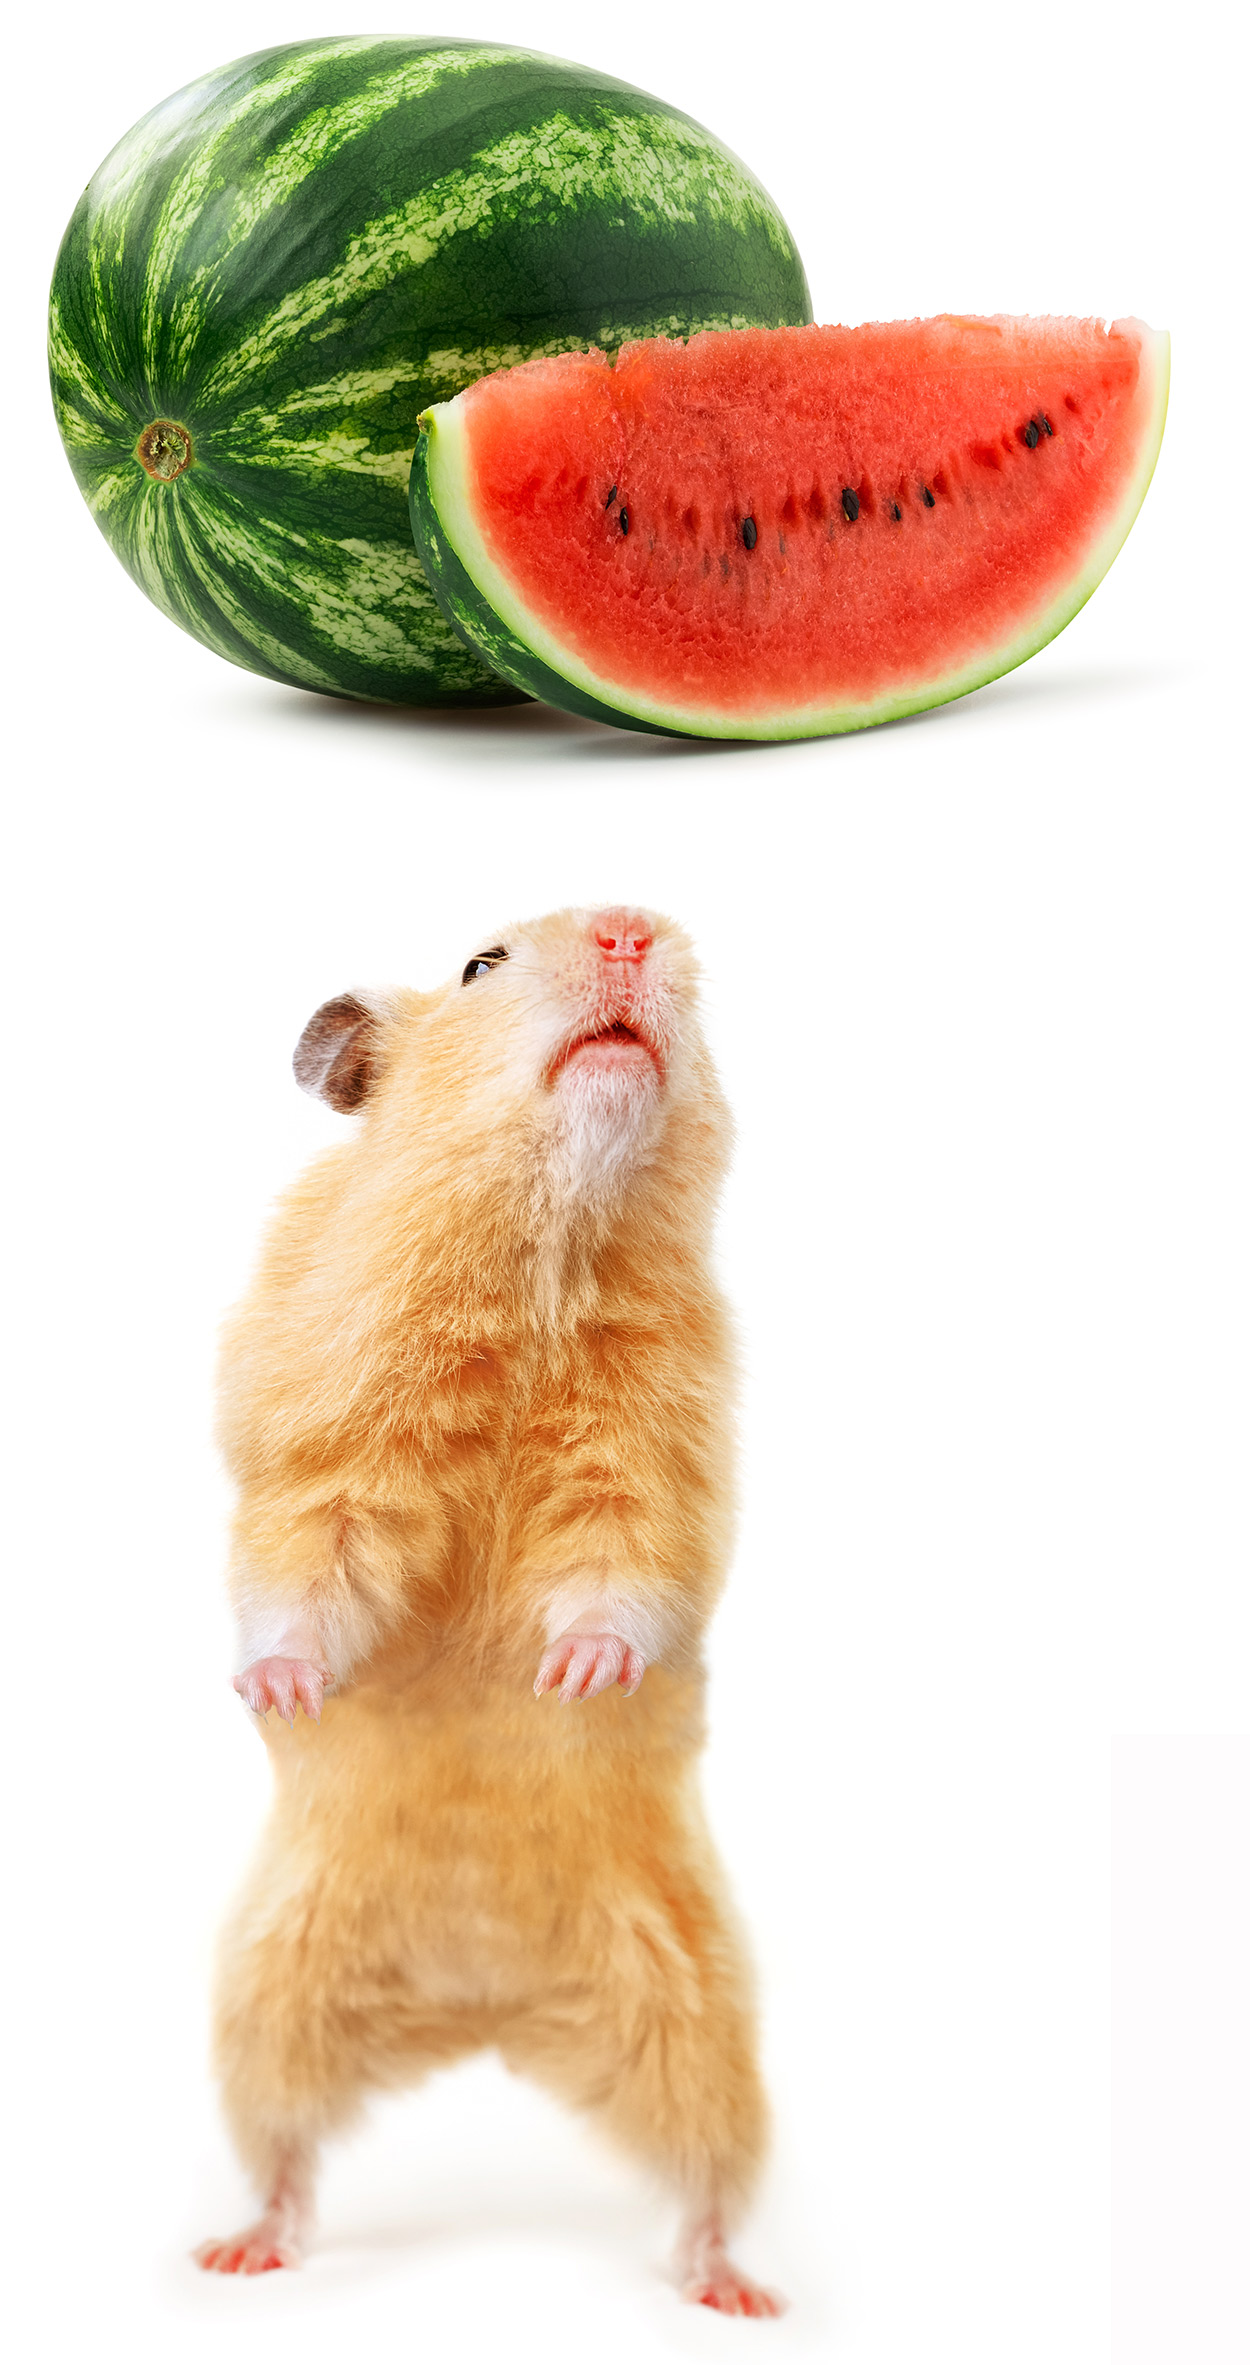 can a hamster eat watermelon